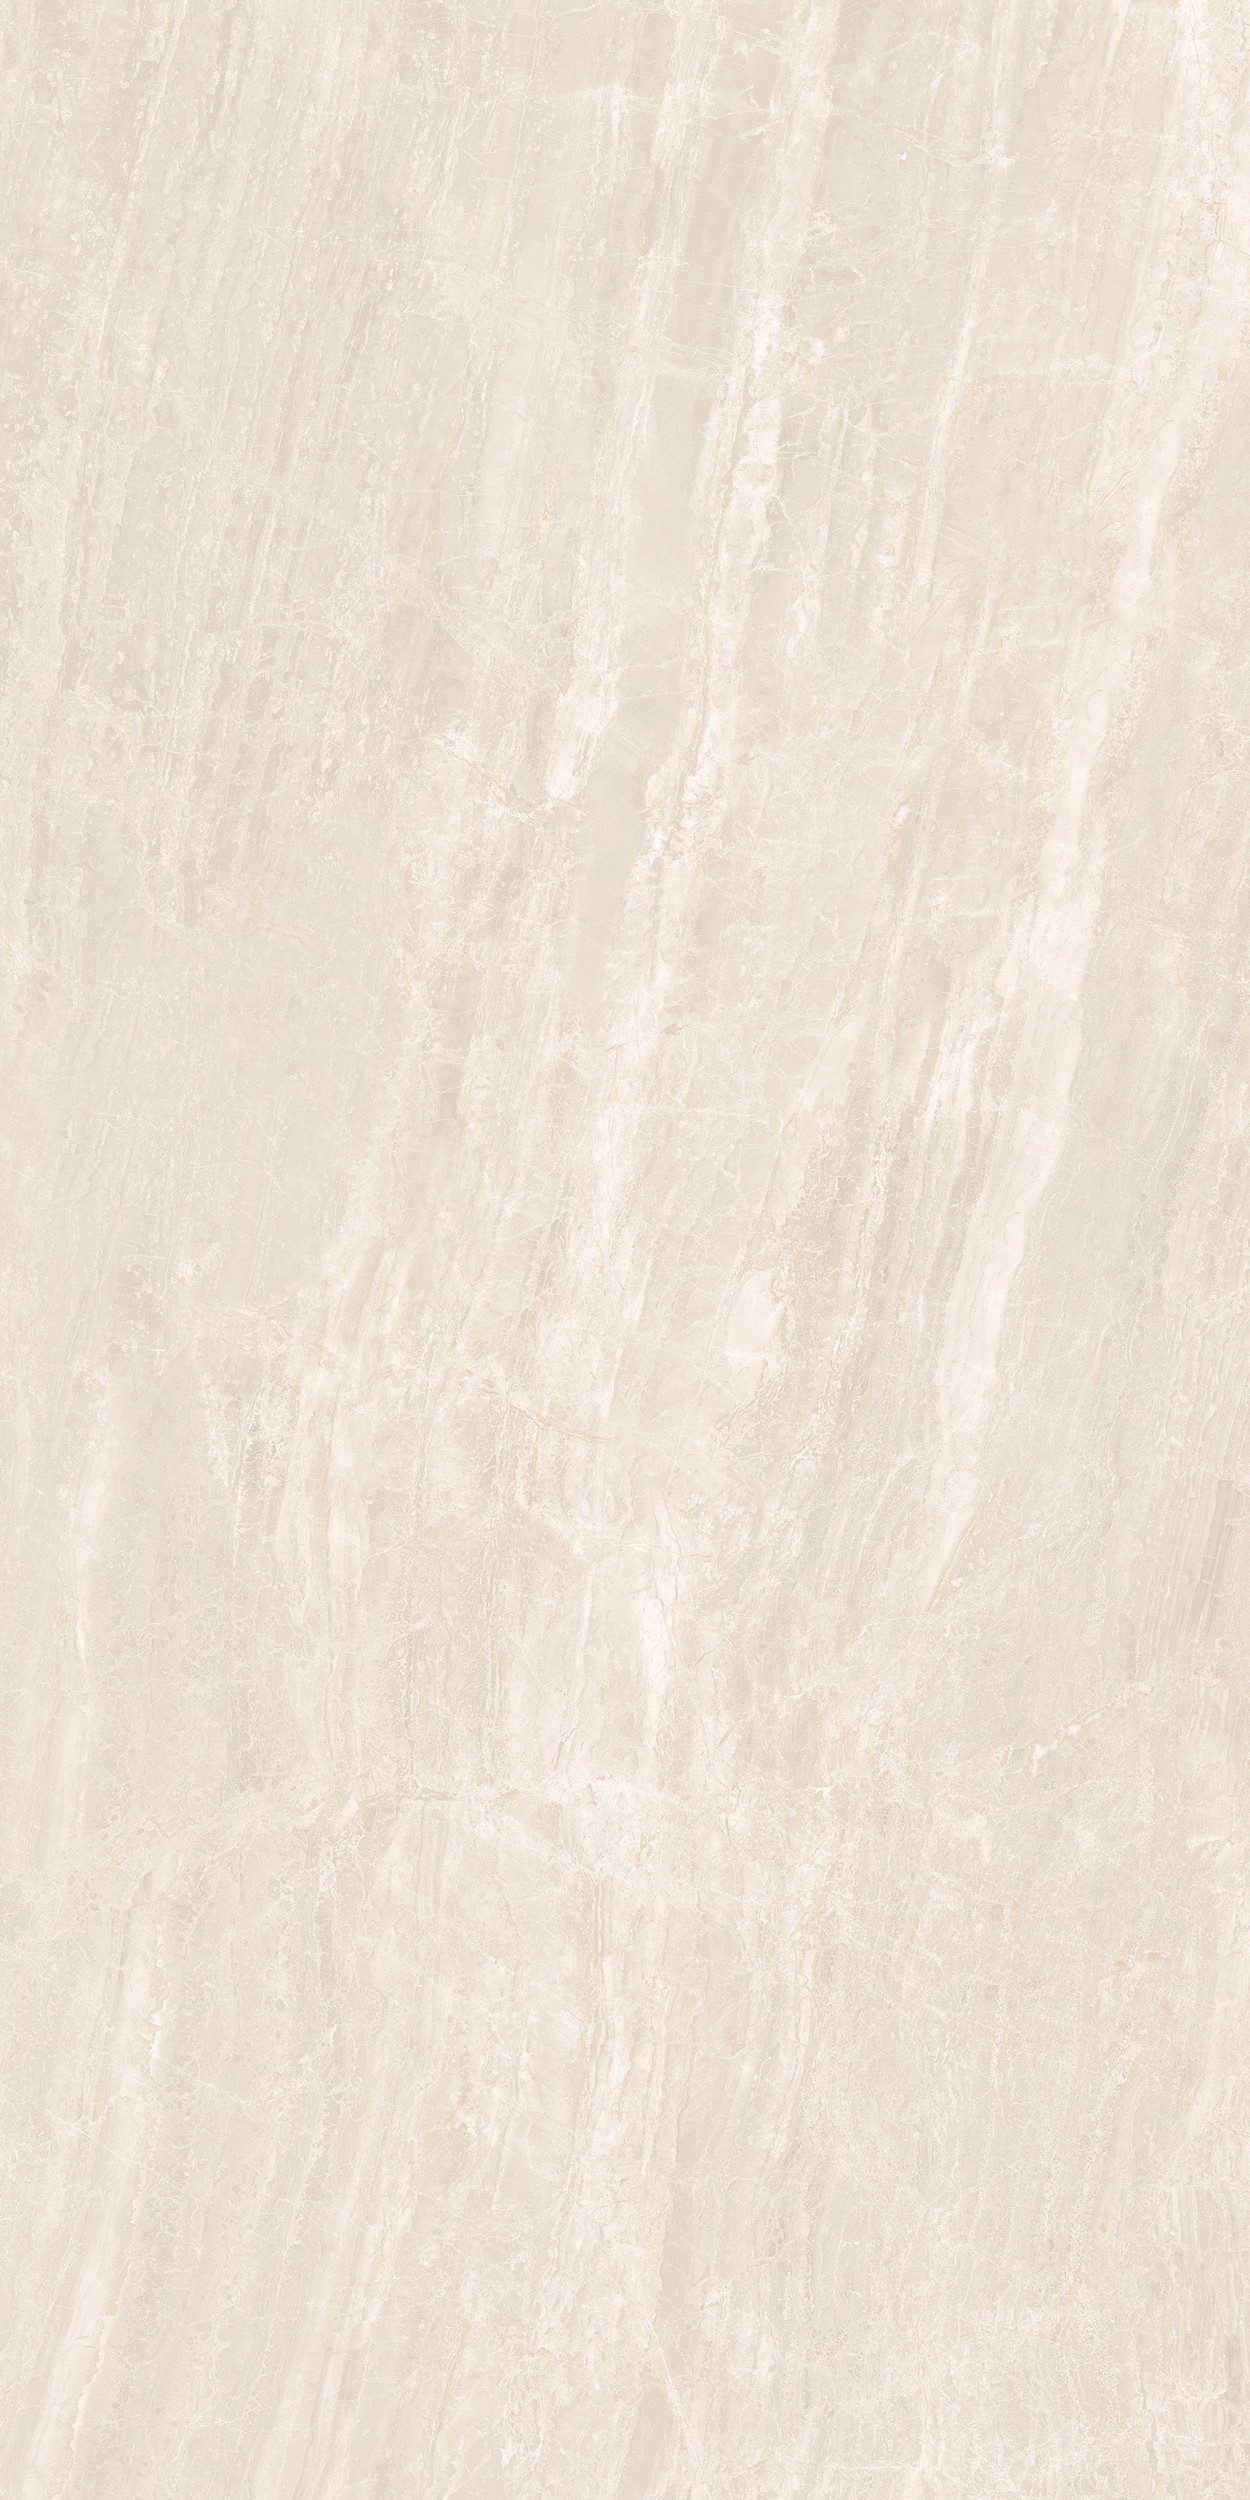 3 x 12 Cosmic Ivory HIGH POLISHED Rectified Porcelain Tile